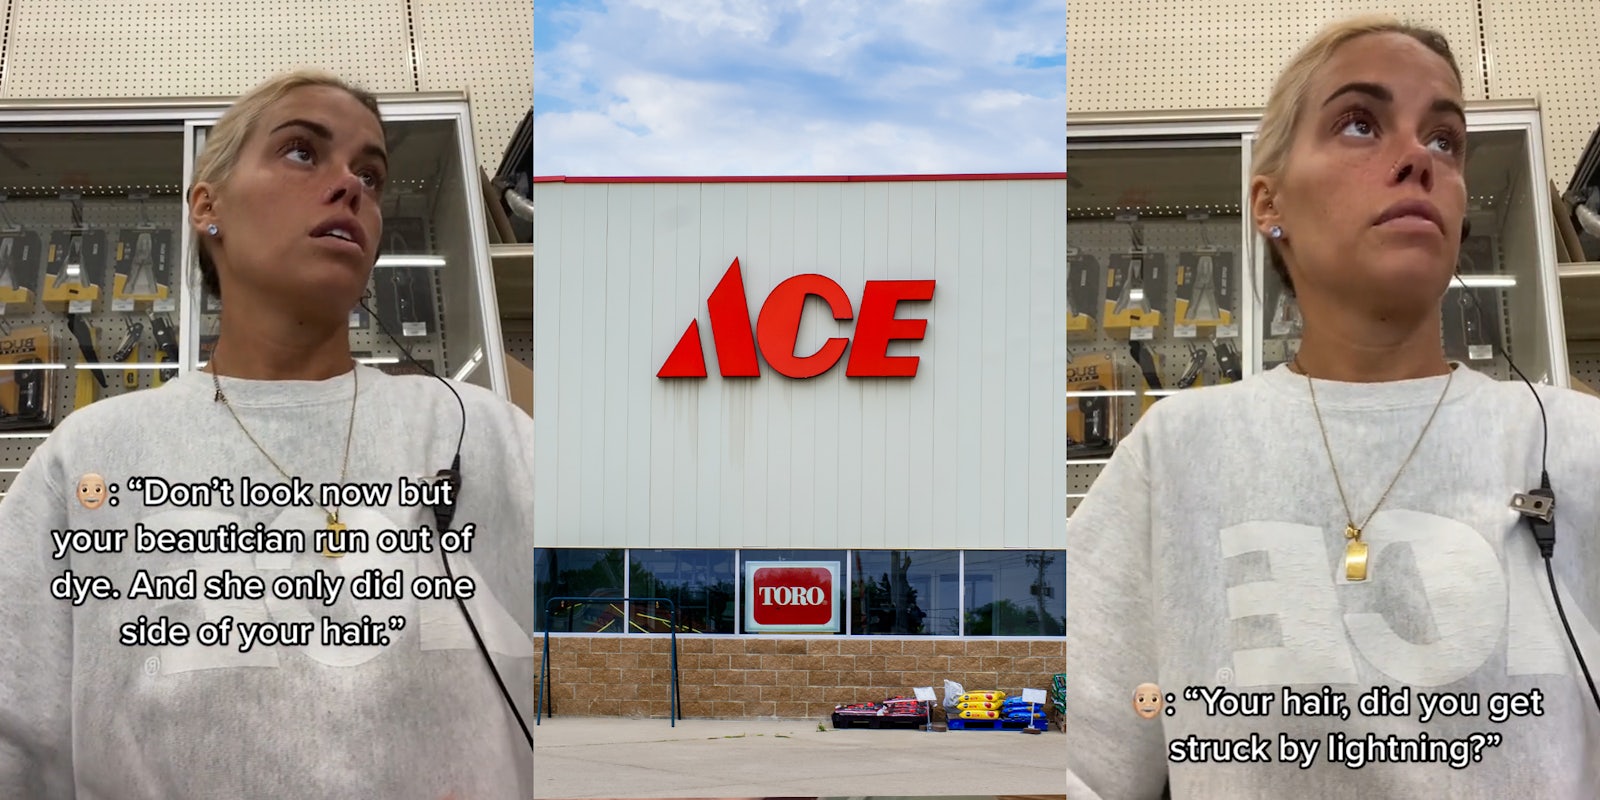 Ace Hardware worker at cash register caption '(old man emoji):'Don't look now but your beautician run out of dye. And she only did one side of your hair.'' (l) Ace Hardware building with sign (c) Ace Hardware worker at cash register caption '(old man emoji): 'Your hair, did you get struck by lightning?'' (r)